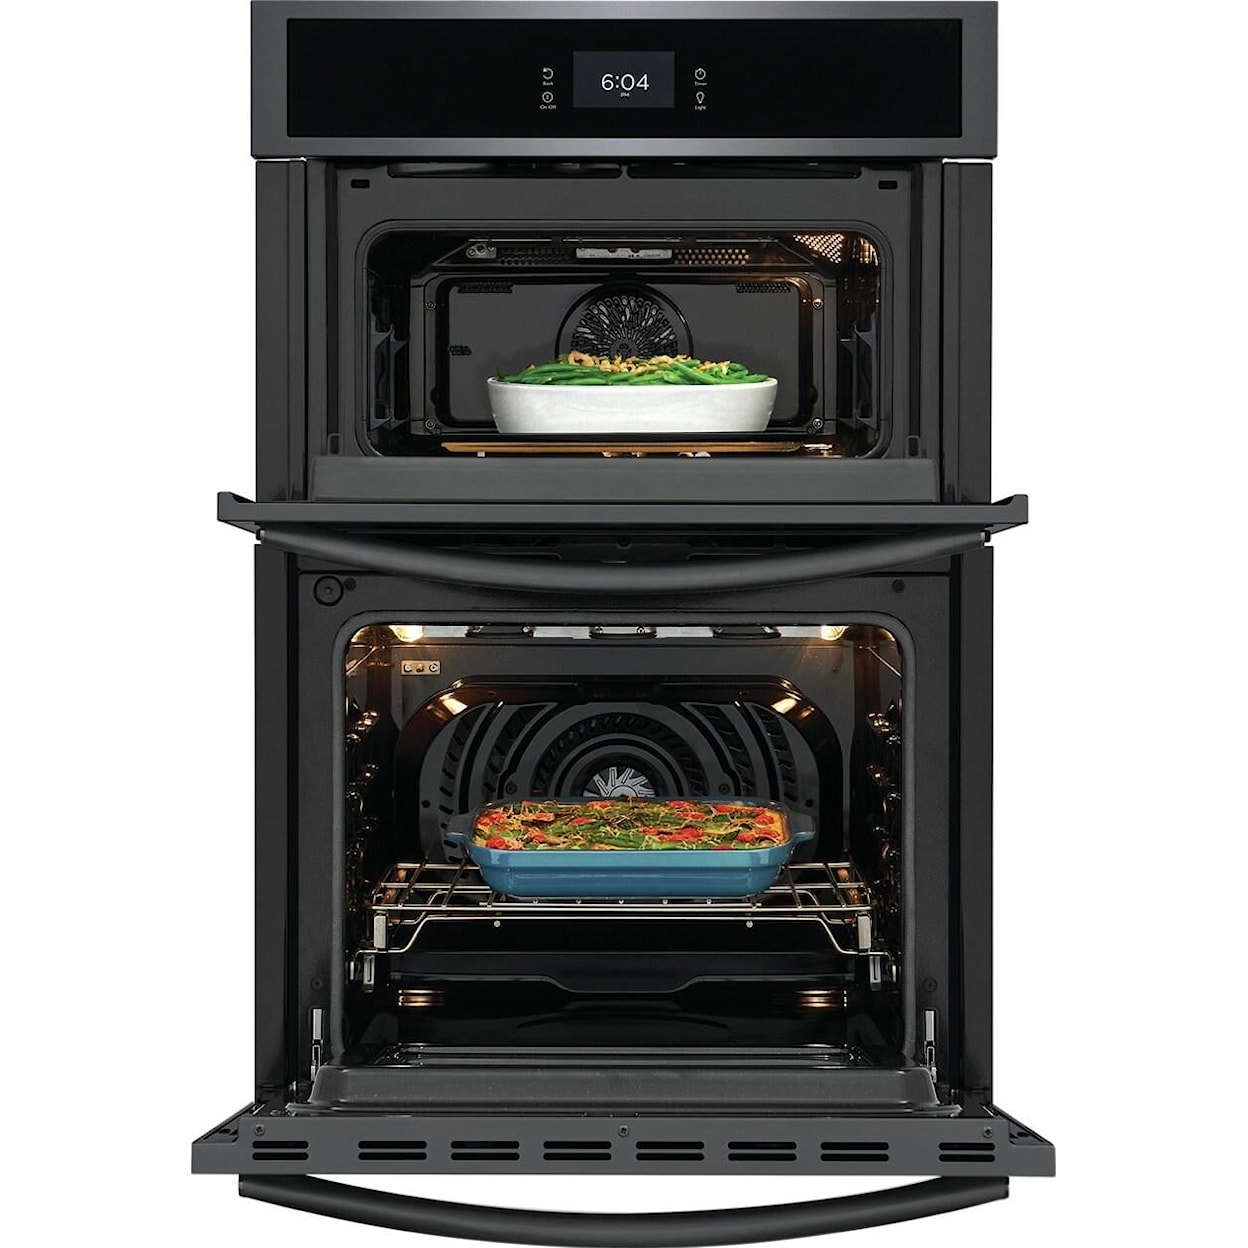 Frigidaire Electric Ranges Wall Oven